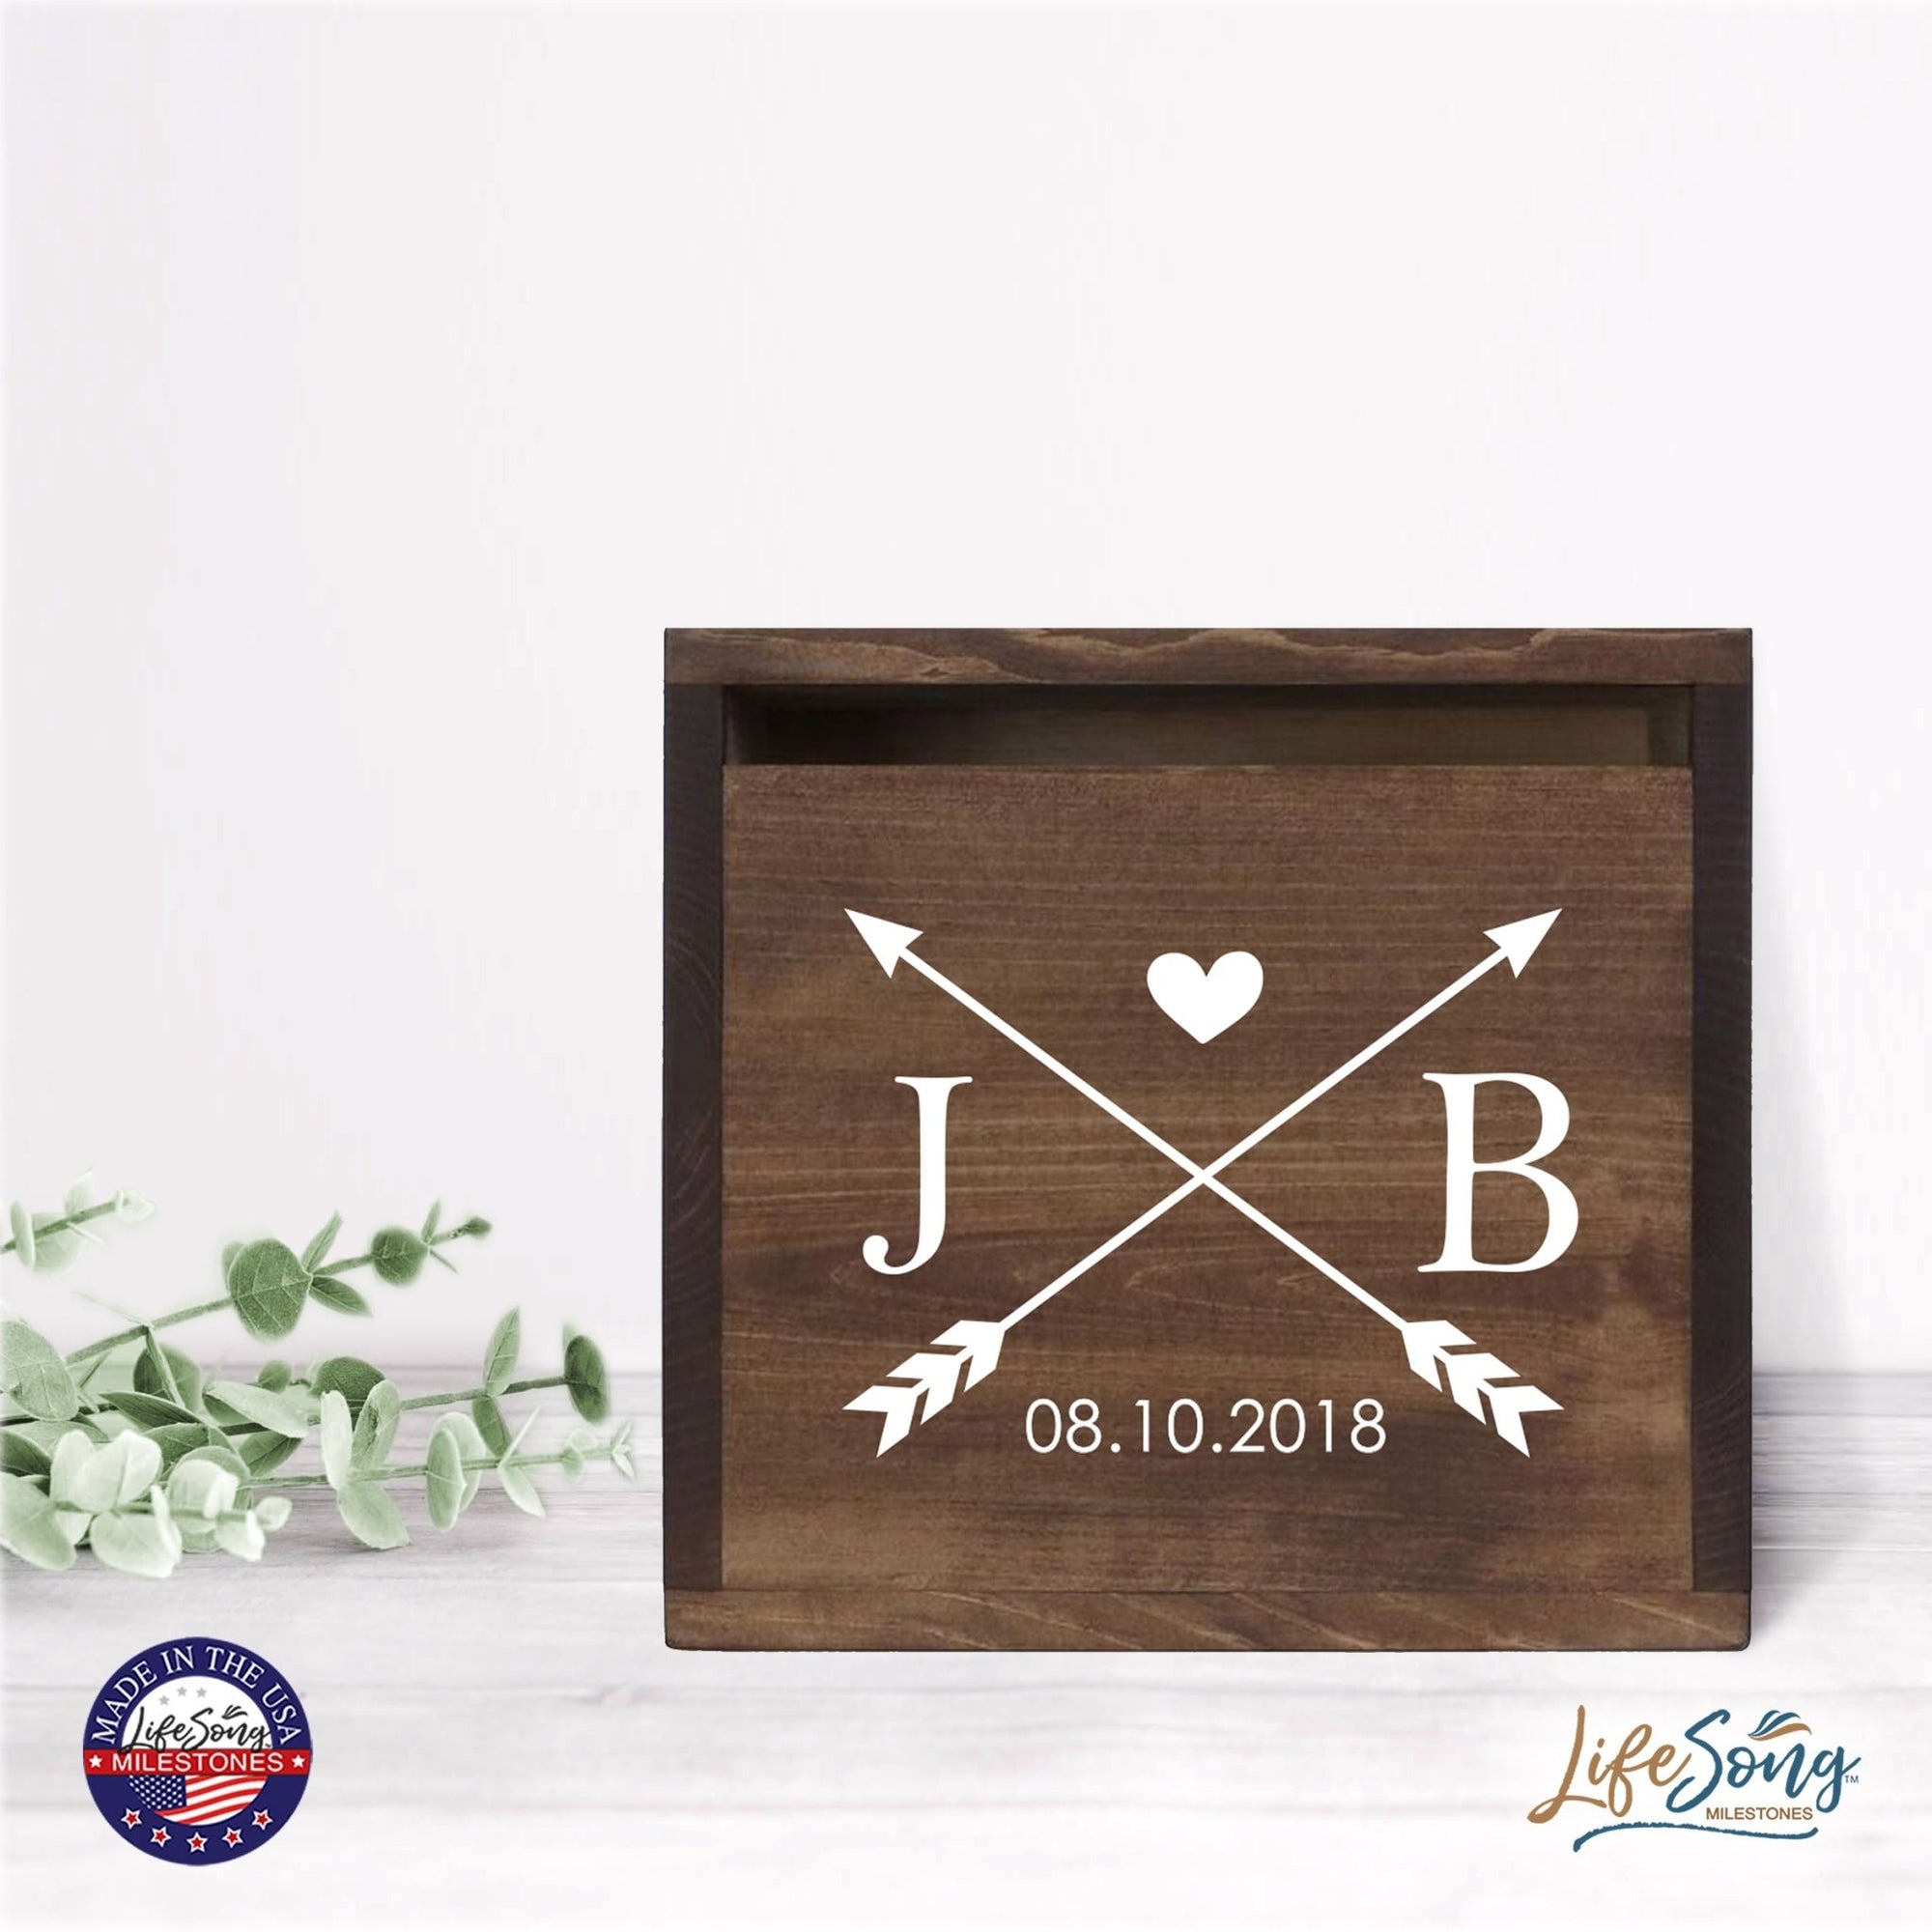 Personalized Wooden Card Box for Wedding Ceremonies, Venues, Receptions, Bridal Showers, and Engagement Parties 13.5x12 - J&B (Arrows) - LifeSong Milestones